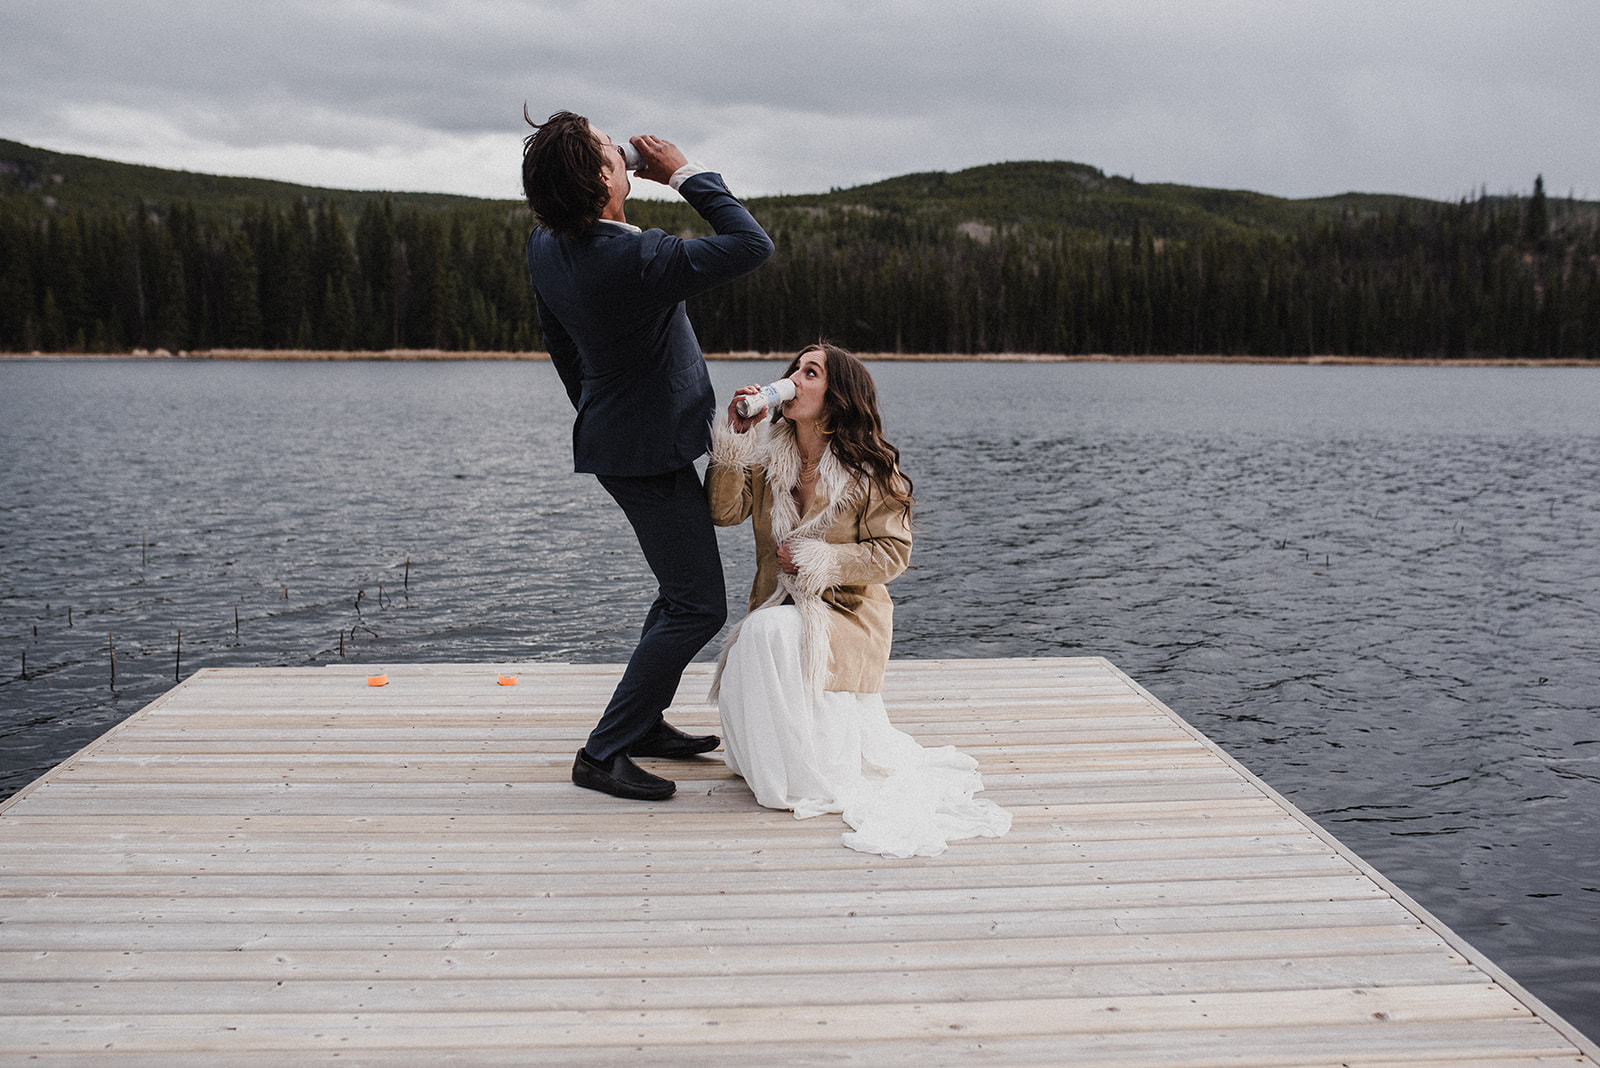 bride and groom on a dock overlooking a lake cheers and chug their website success thanks to Pepper SEO services. 